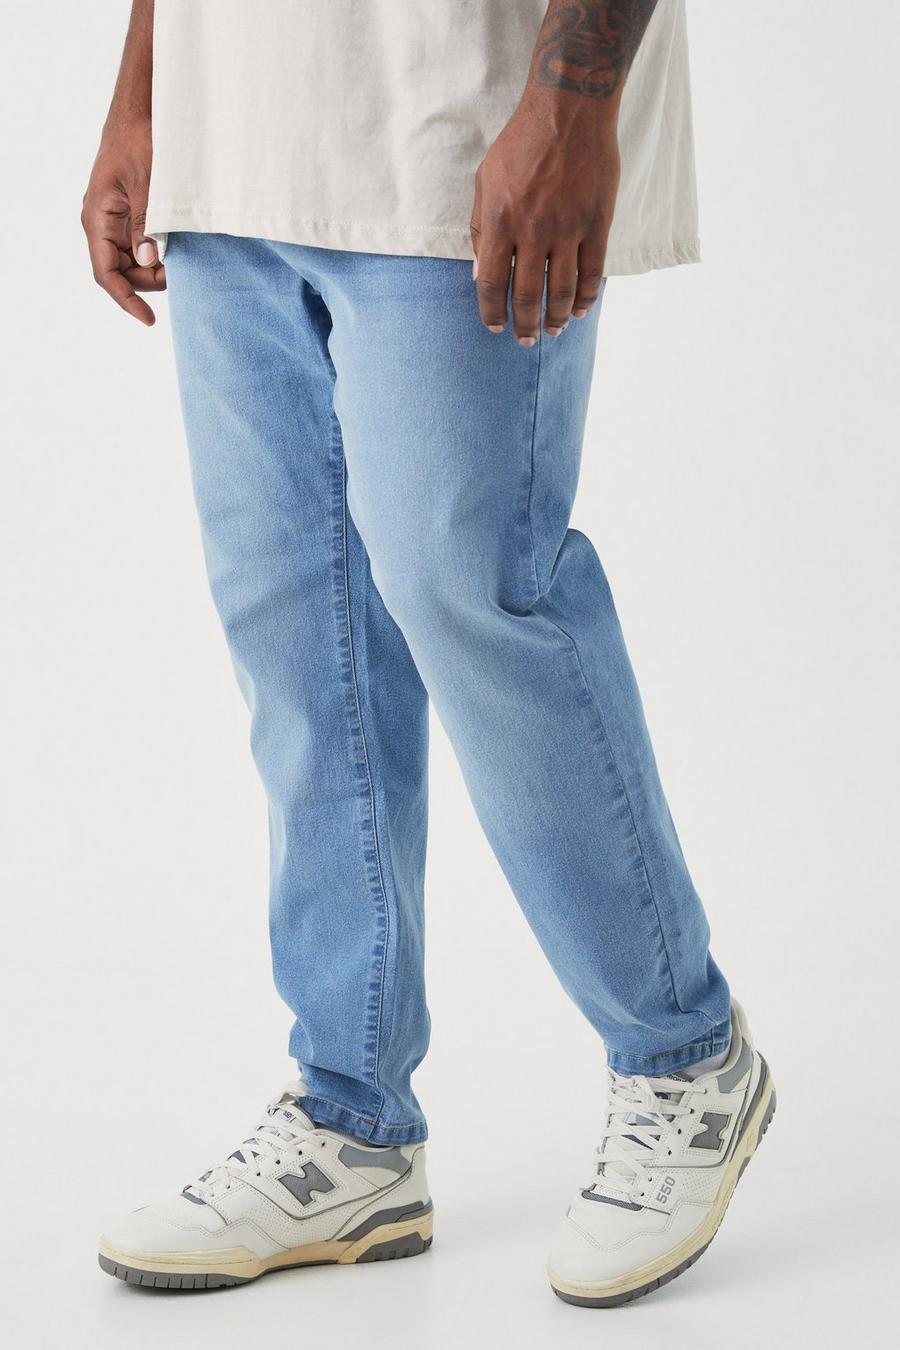 Men's Relaxed Fit Stretch Light Blue Jeans